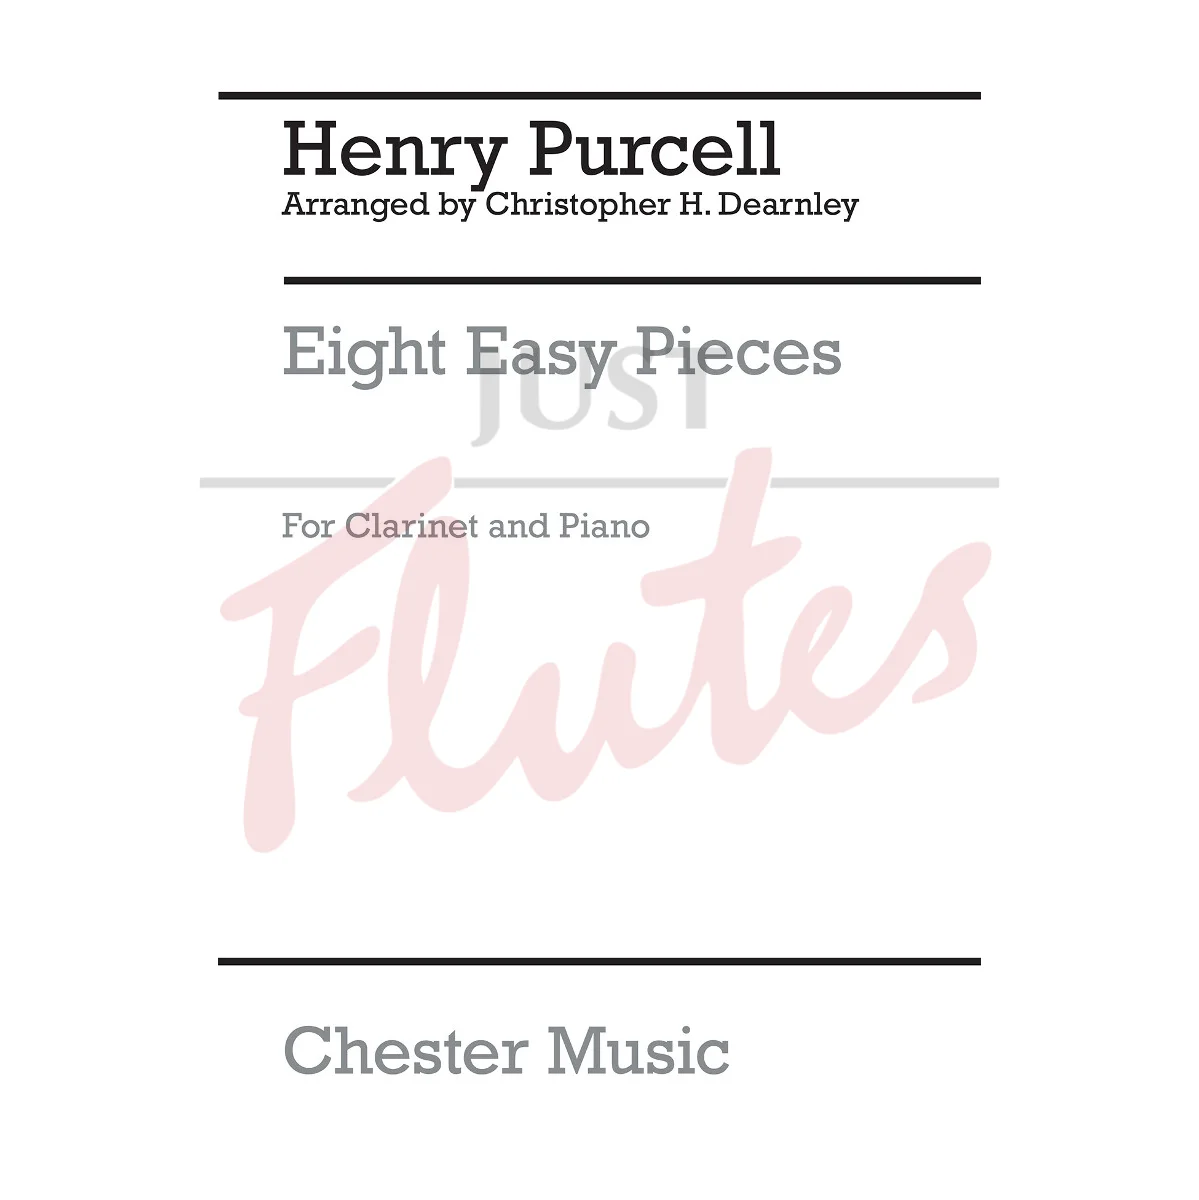 8 Easy Pieces for Clarinet and Piano